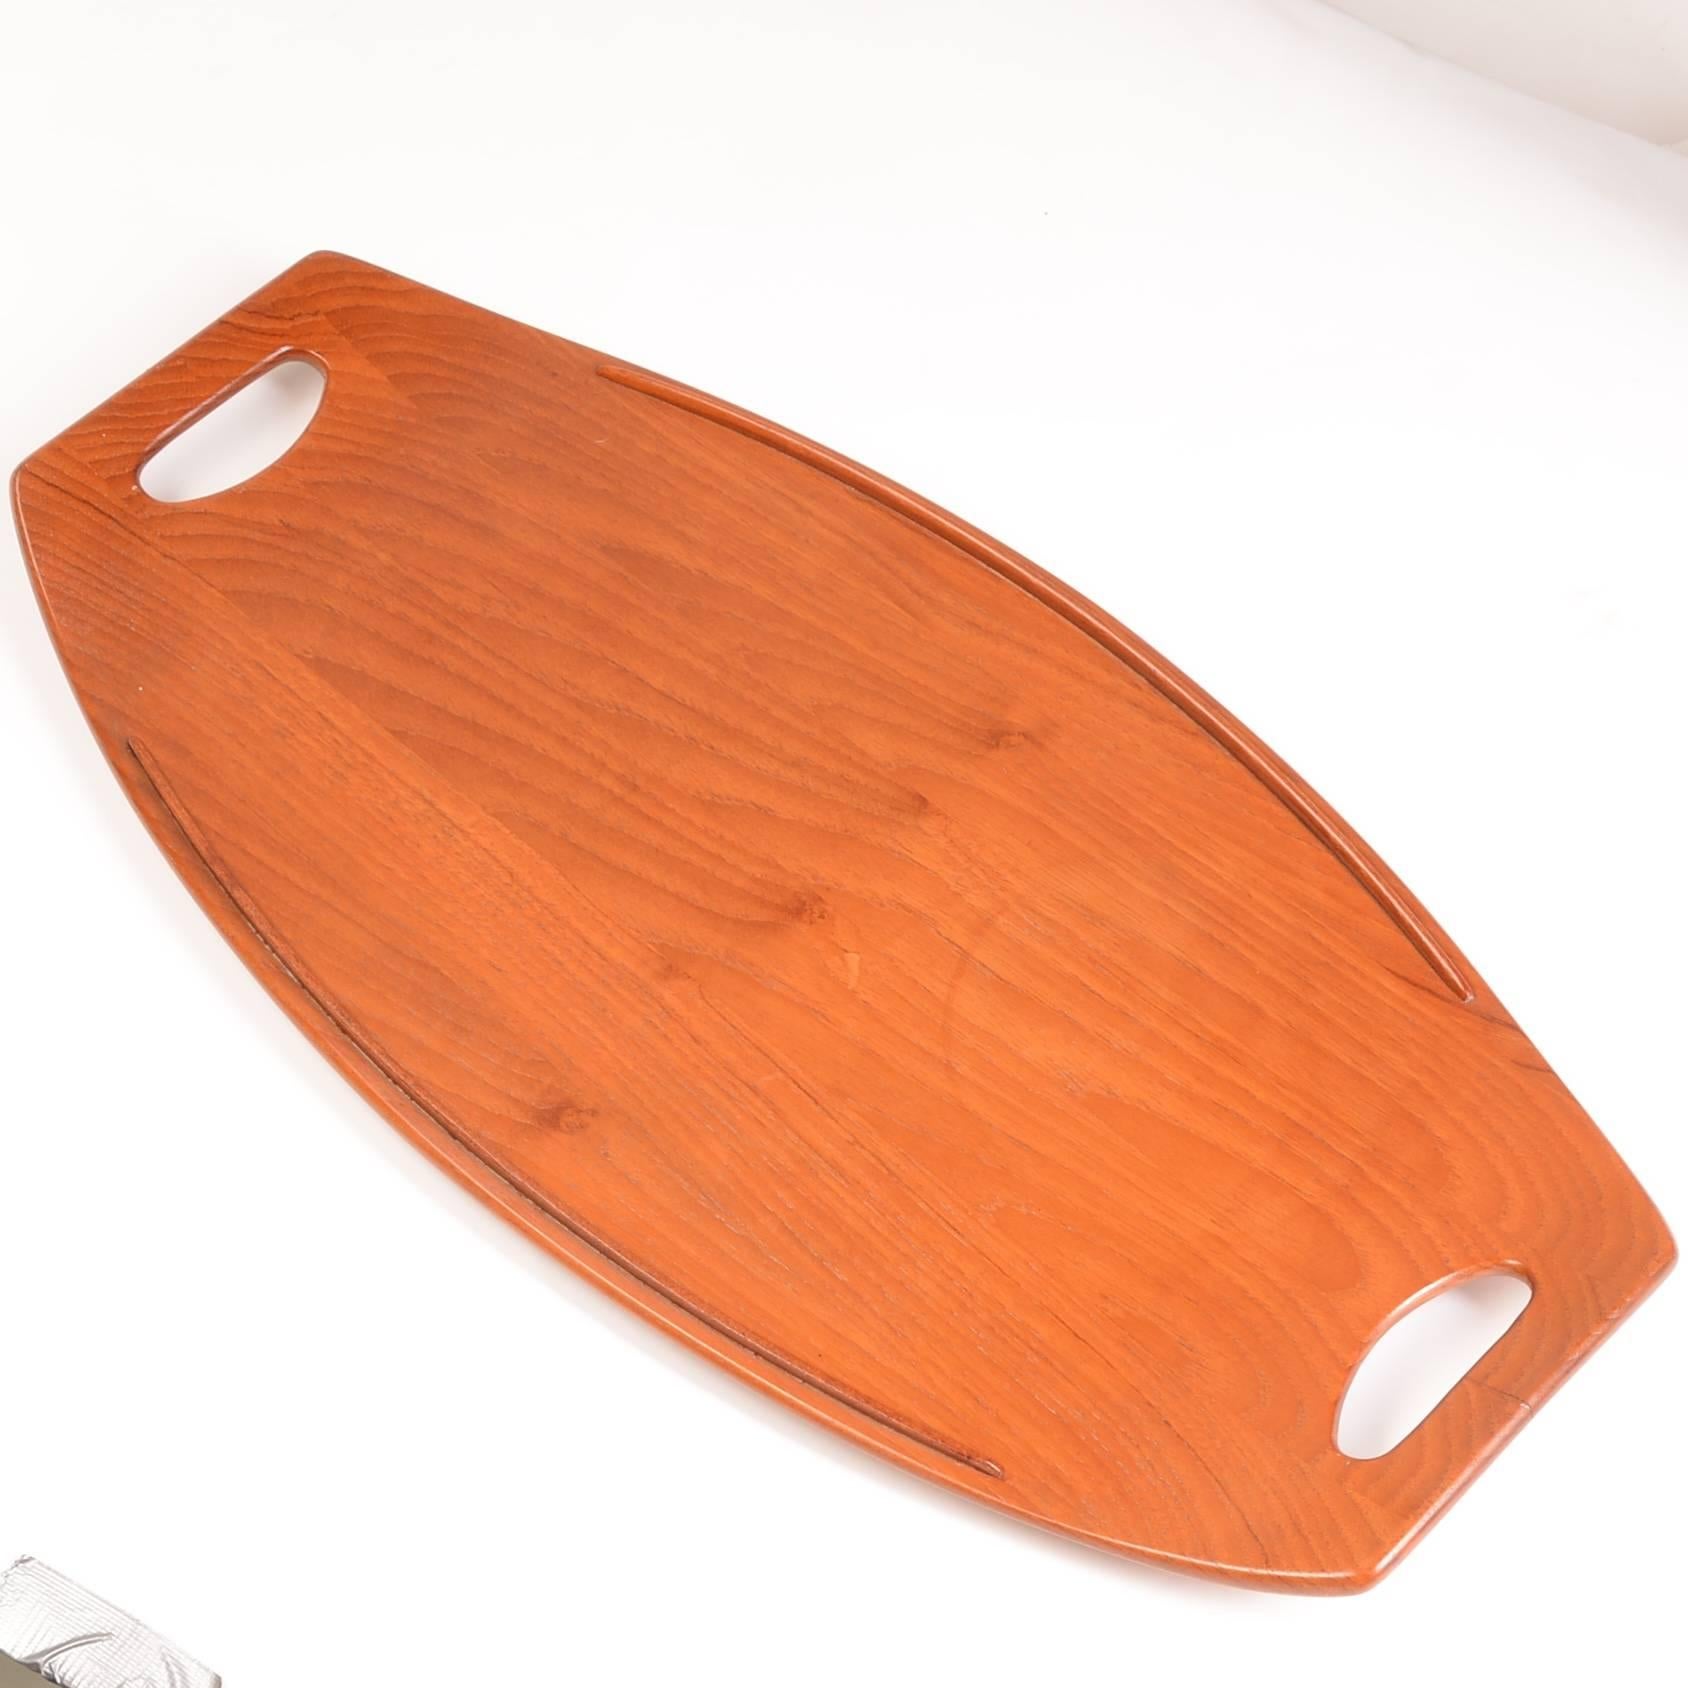 Beautiful Danish teak serving tray will make a chic statement at a party or on your tabletop. Ideal for serving cheese, bread or appetizers.